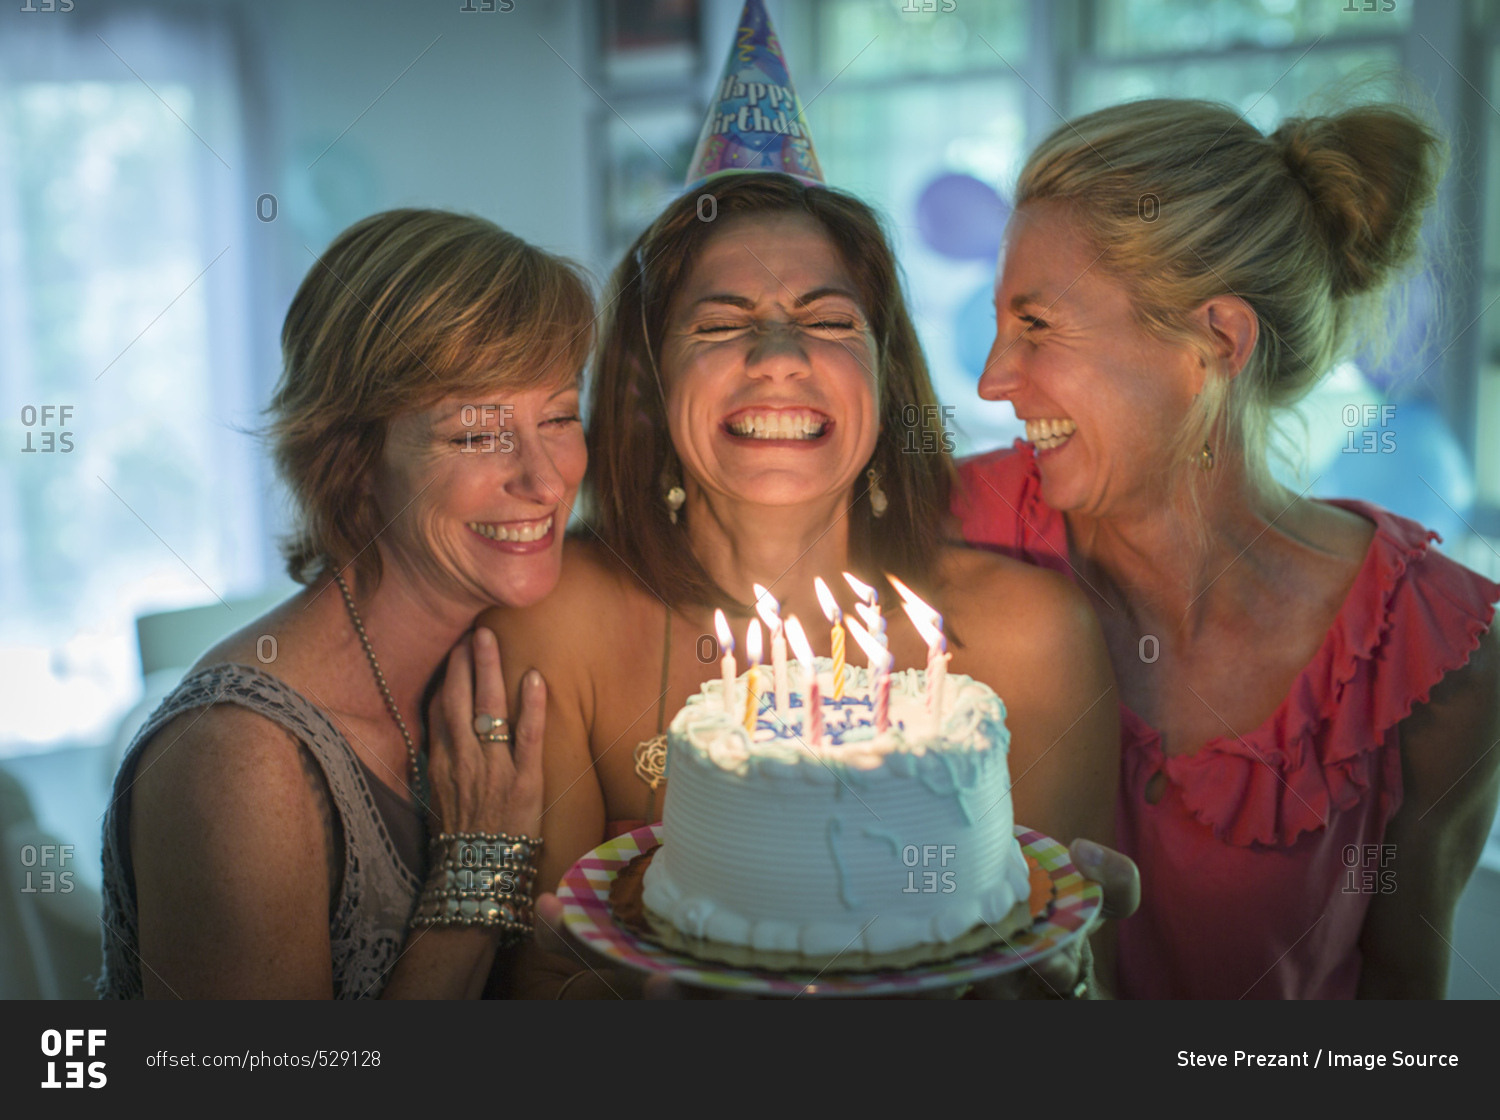 Mature woman holding birthday cake, making wish while two friends look on